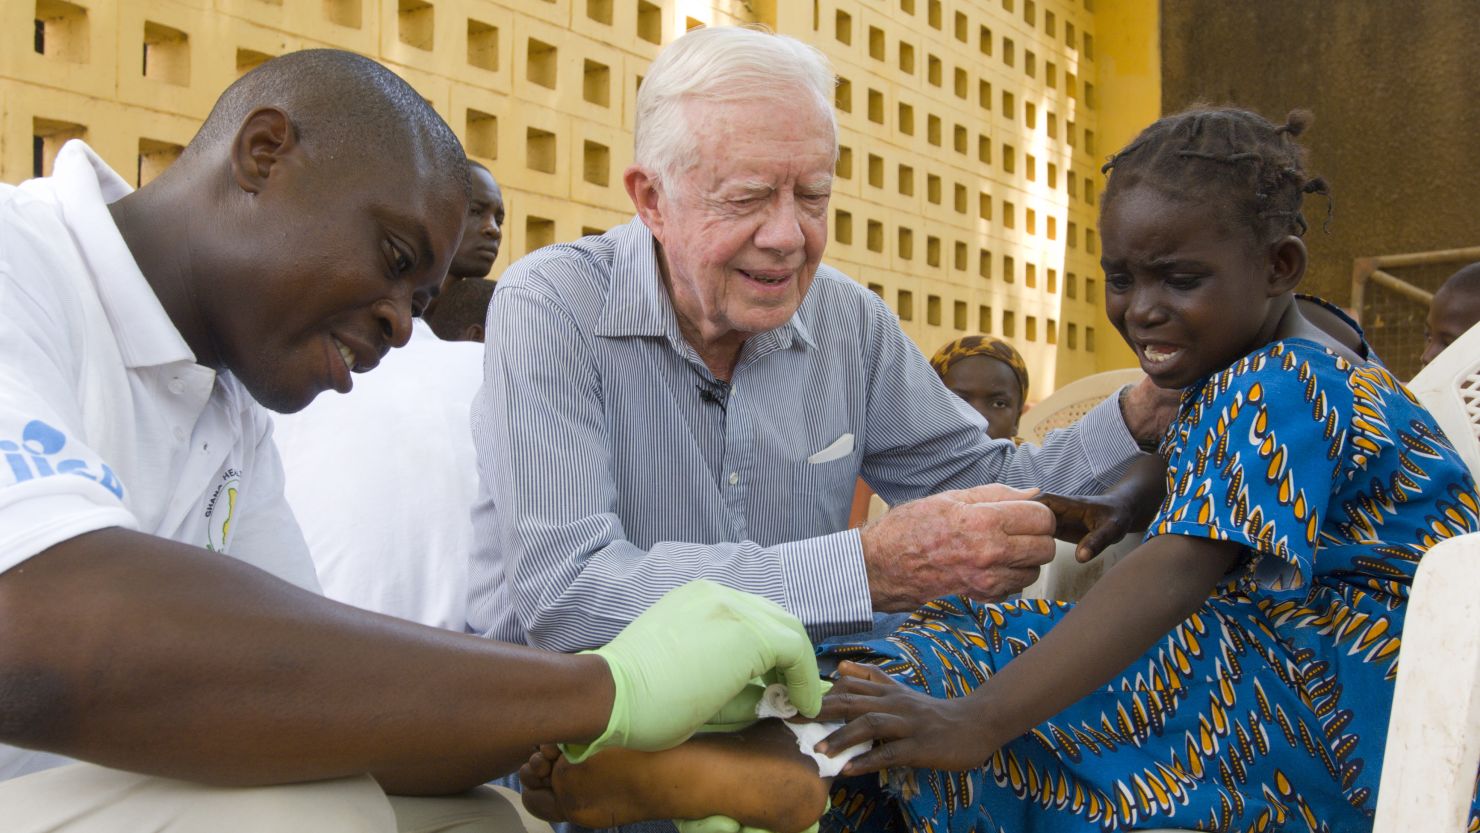 Former President Jimmy Carter consoles 6-year-old Ruhama Issah, who has Guinea worm, in Ghana in 2007.